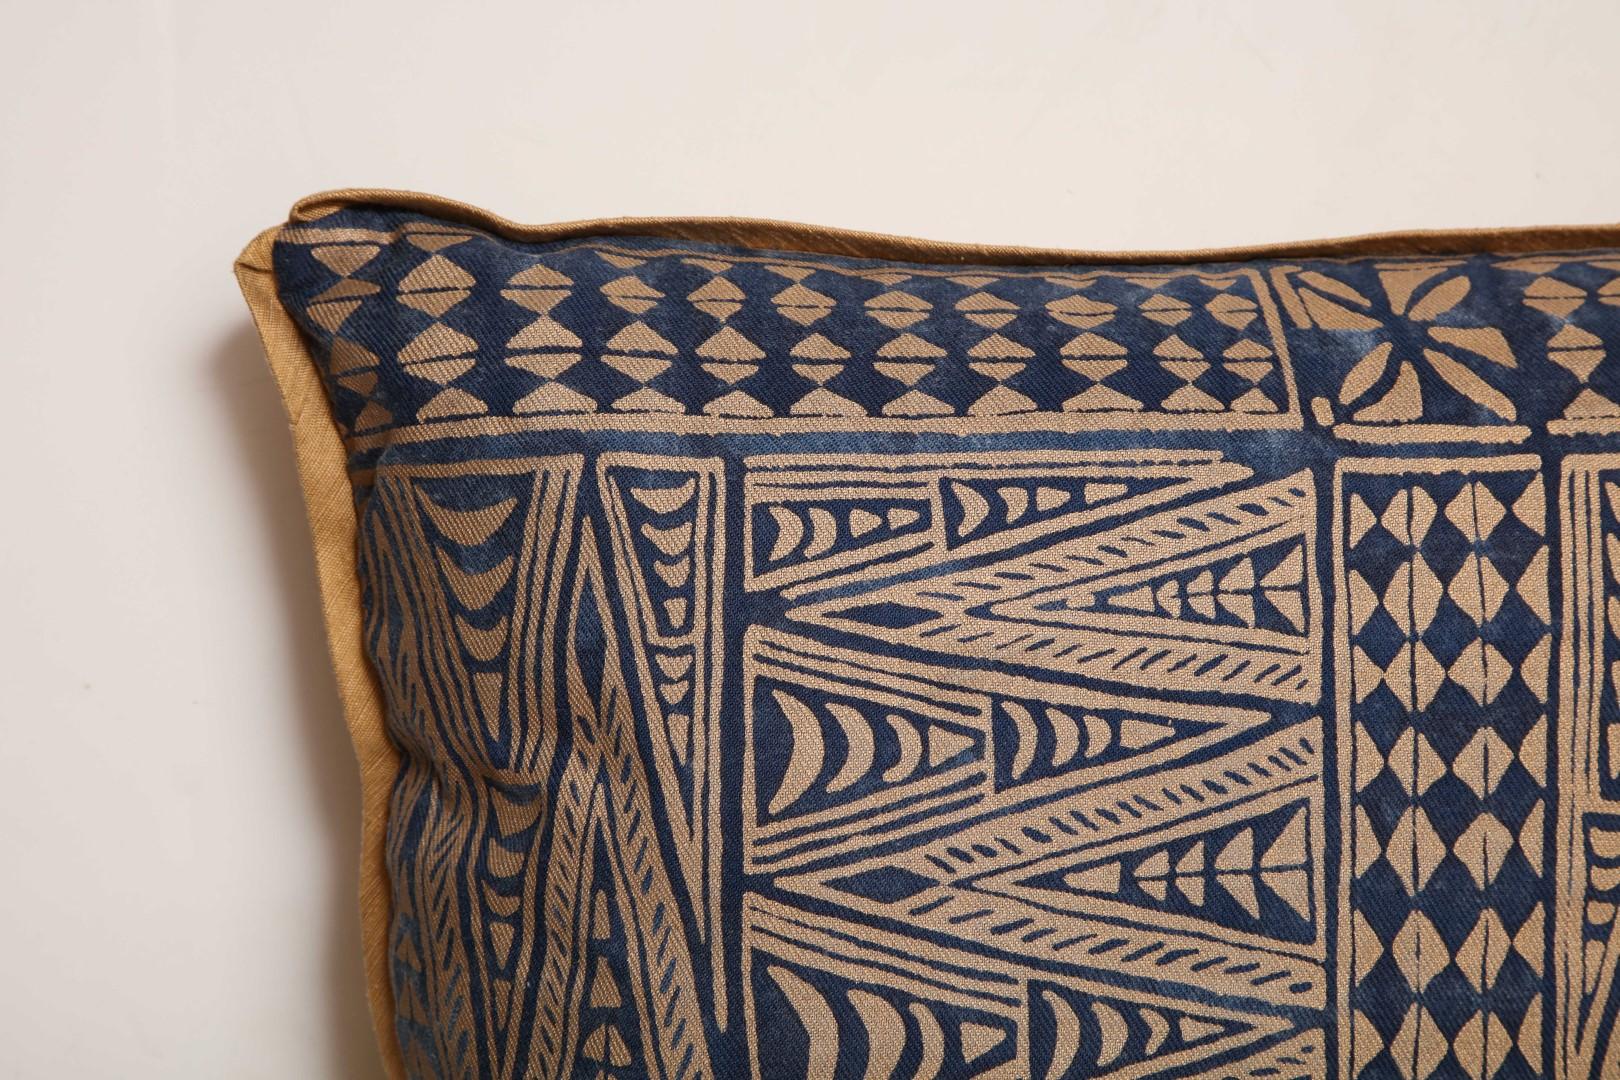 American Pair of Fortuny Fabric Cushions in the Melilla Pattern 